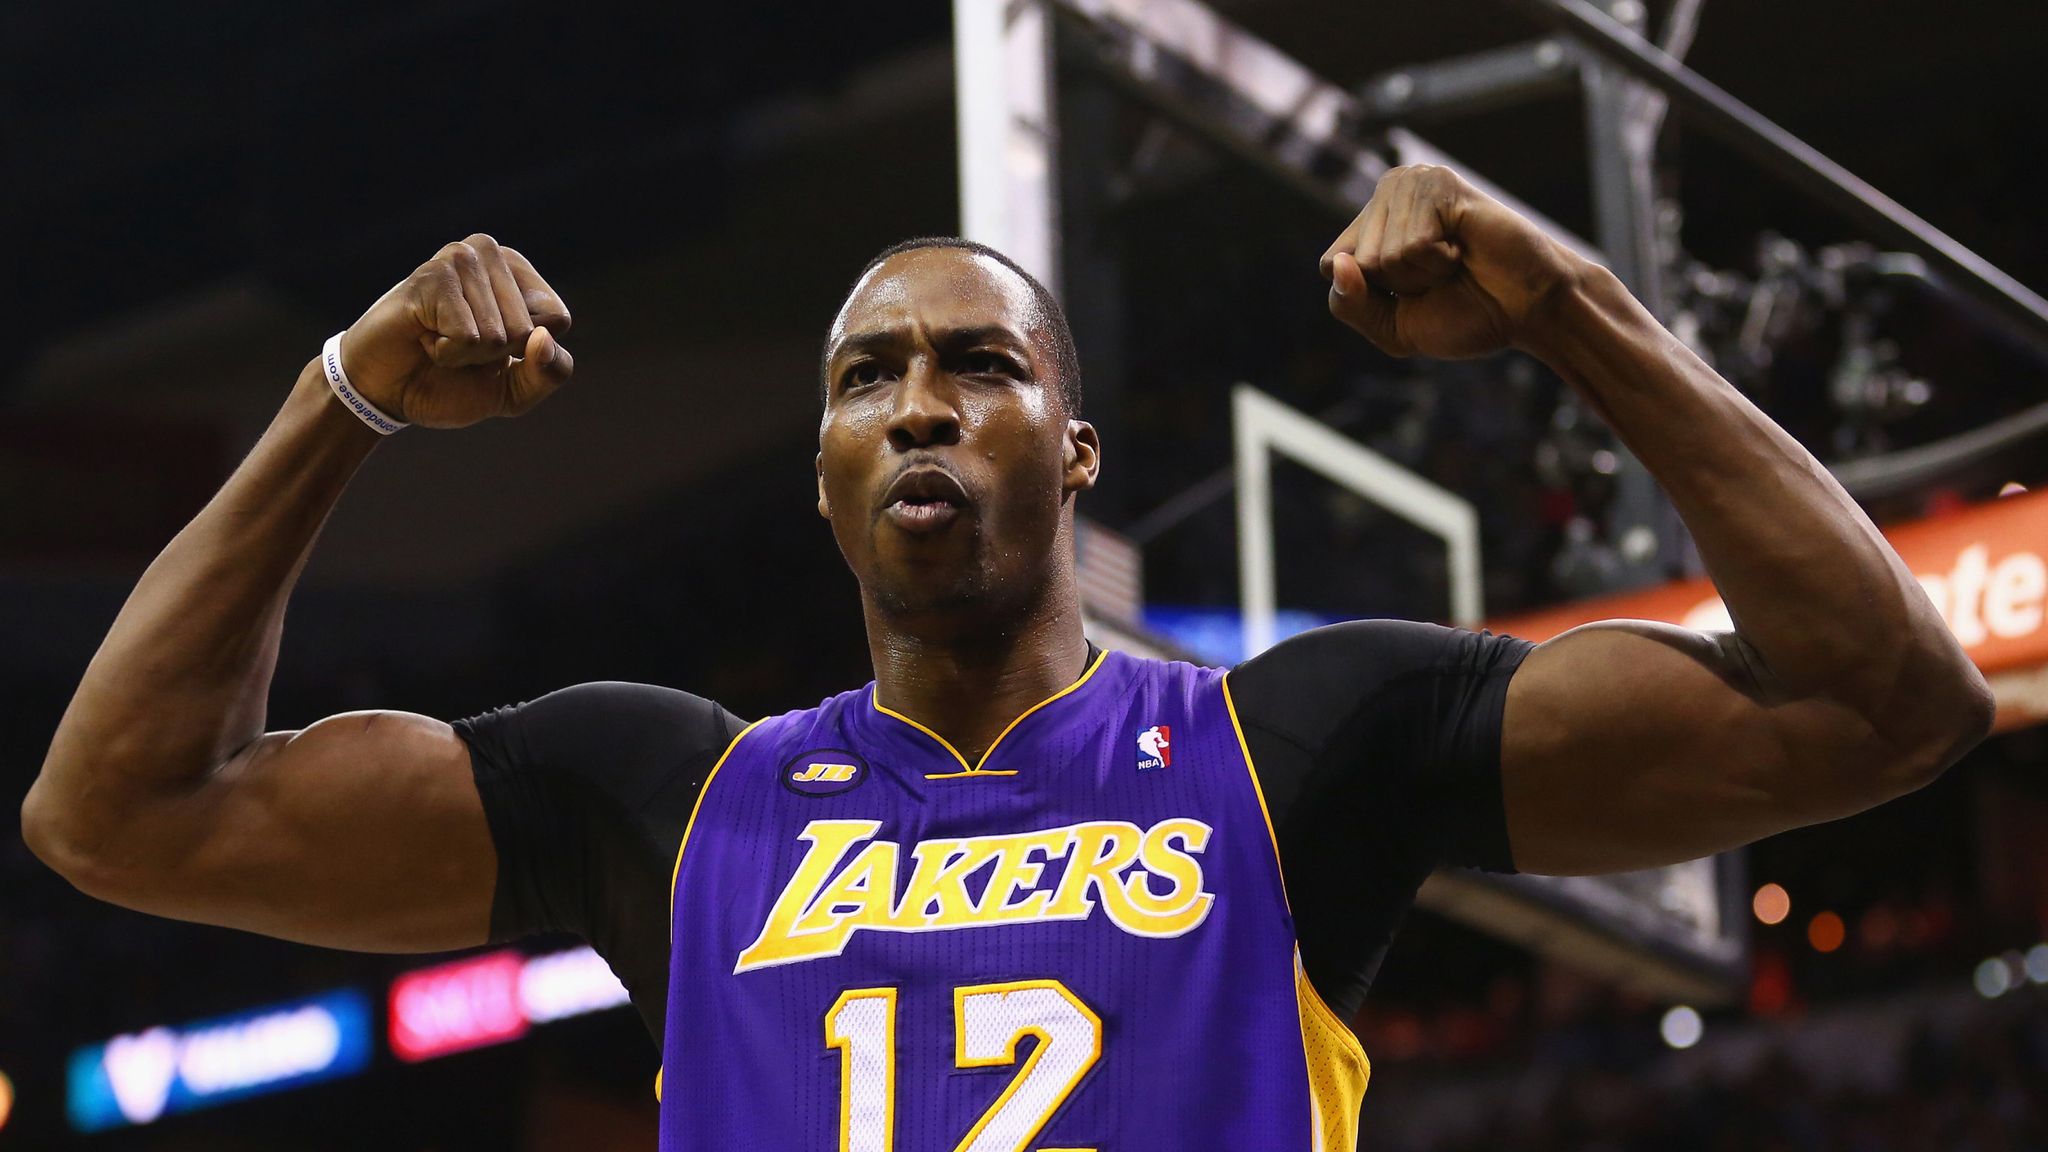 Dwight Howard Says He Can Play for Another 10-11 Years